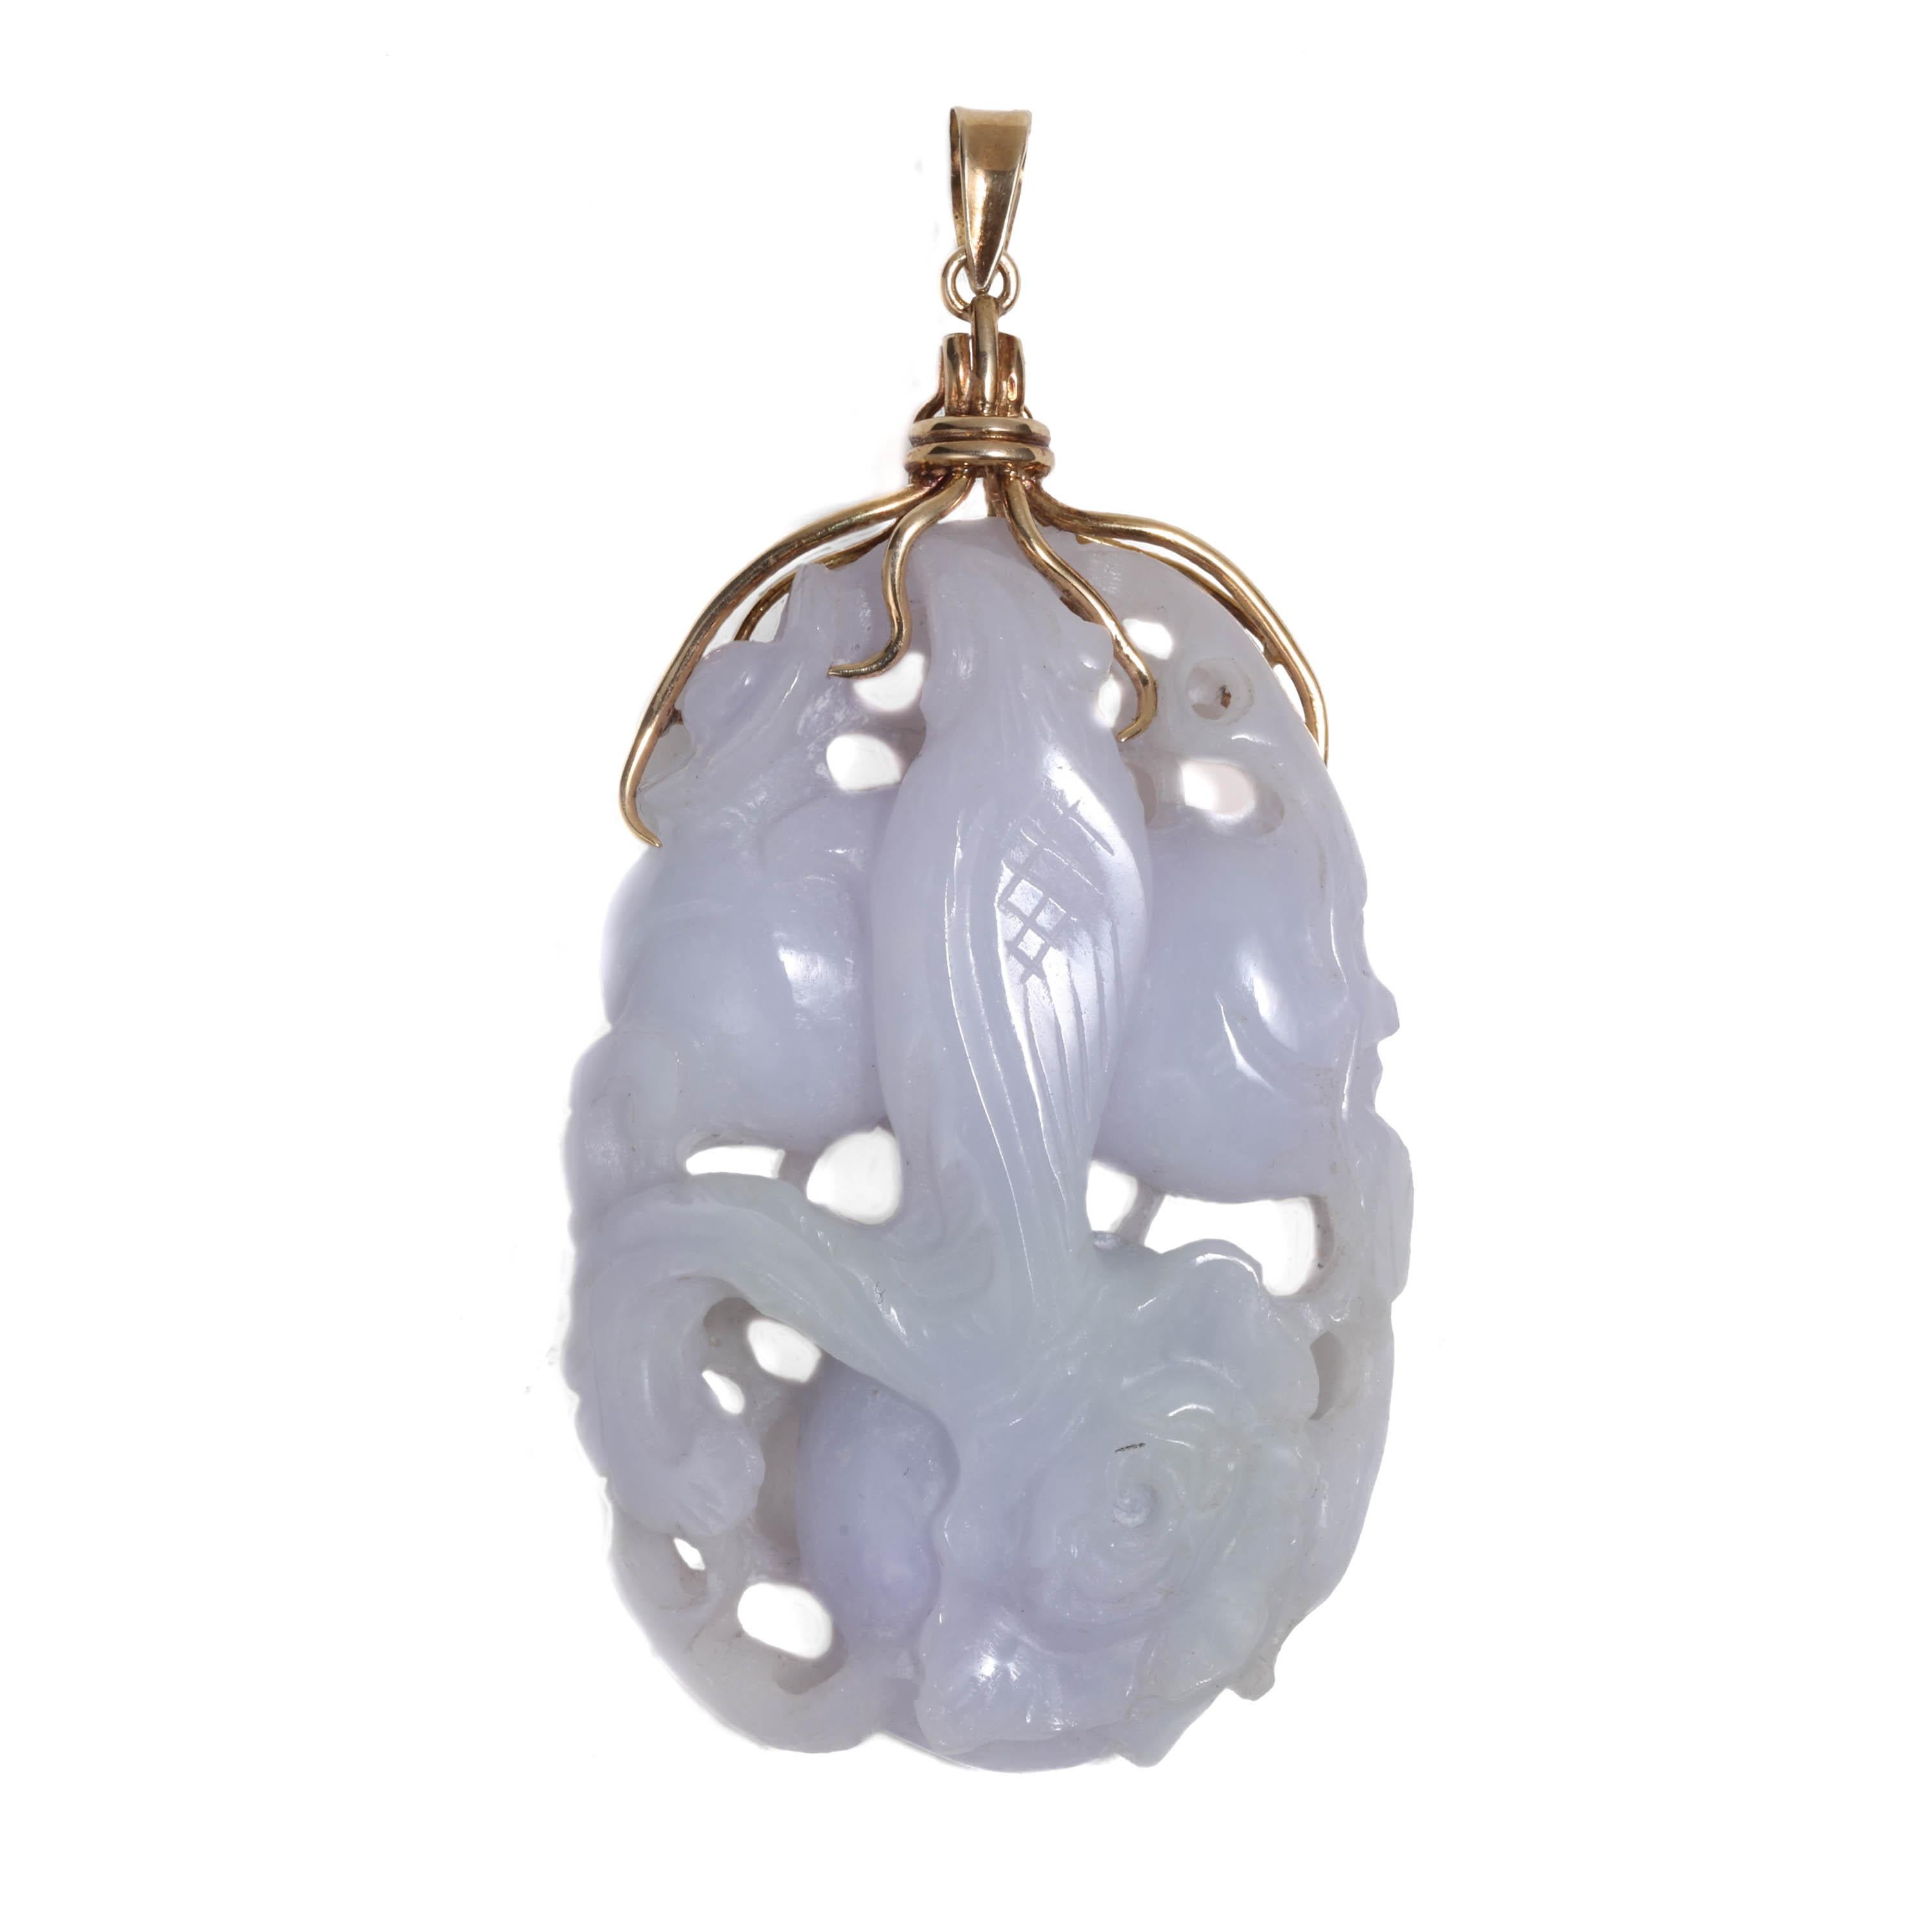 This circa 1950s natural and untreated jadeite pendant is a showcase of lapidary skill and artistry. The pale violet and light green stone has been carved and pierced, depicting a regal bird poised with fruit and flowers on one side, lacy vines on